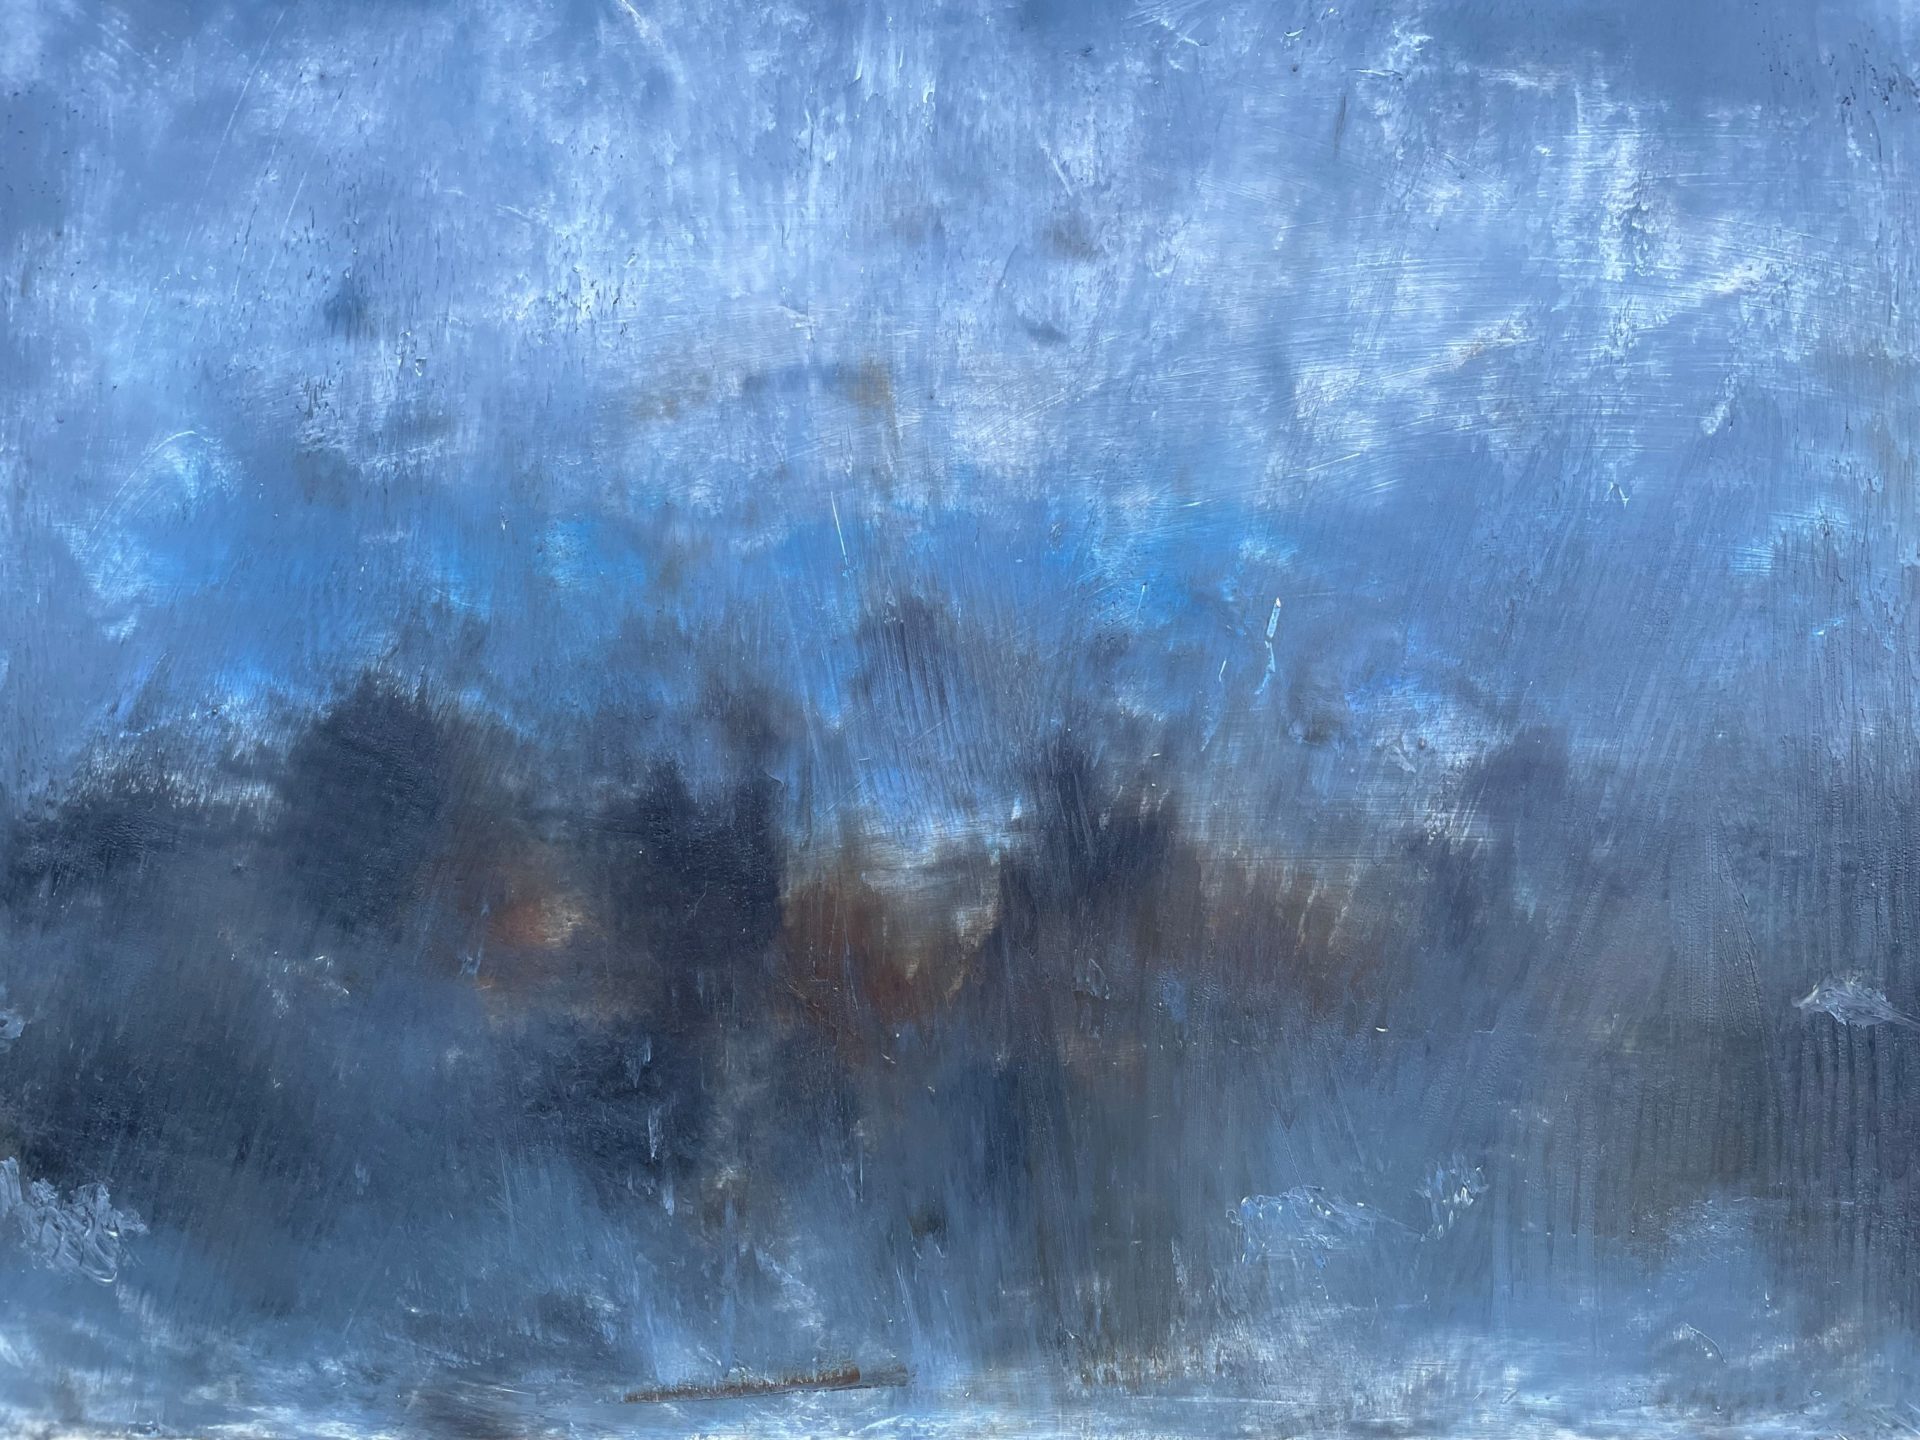 Oil painting for sale in the UK with delivery blues and blacks abstract atmospheric landscape